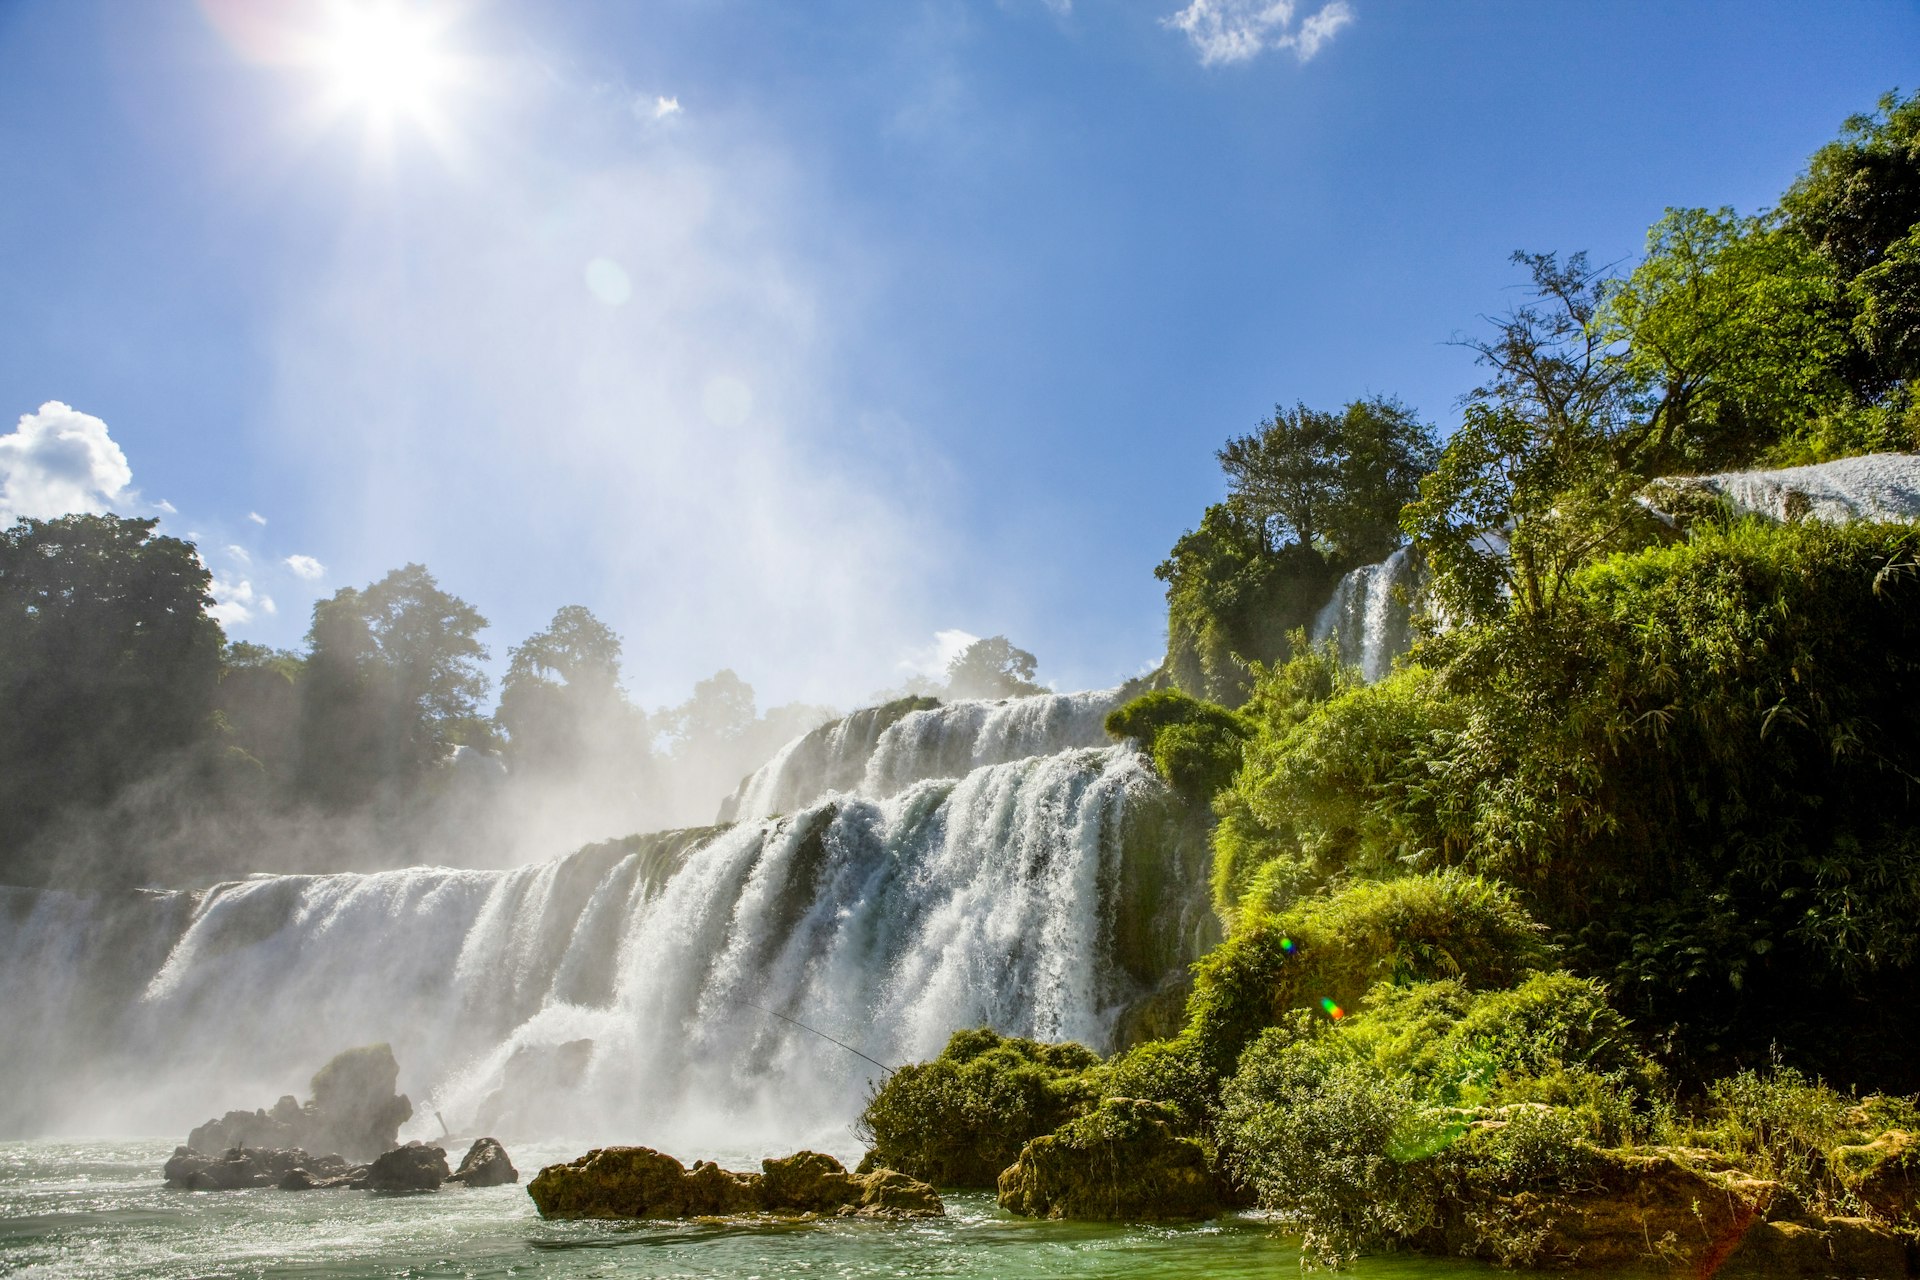 The Ban Gioc Waterfalls flanked by green vegetation on a sunny day.  